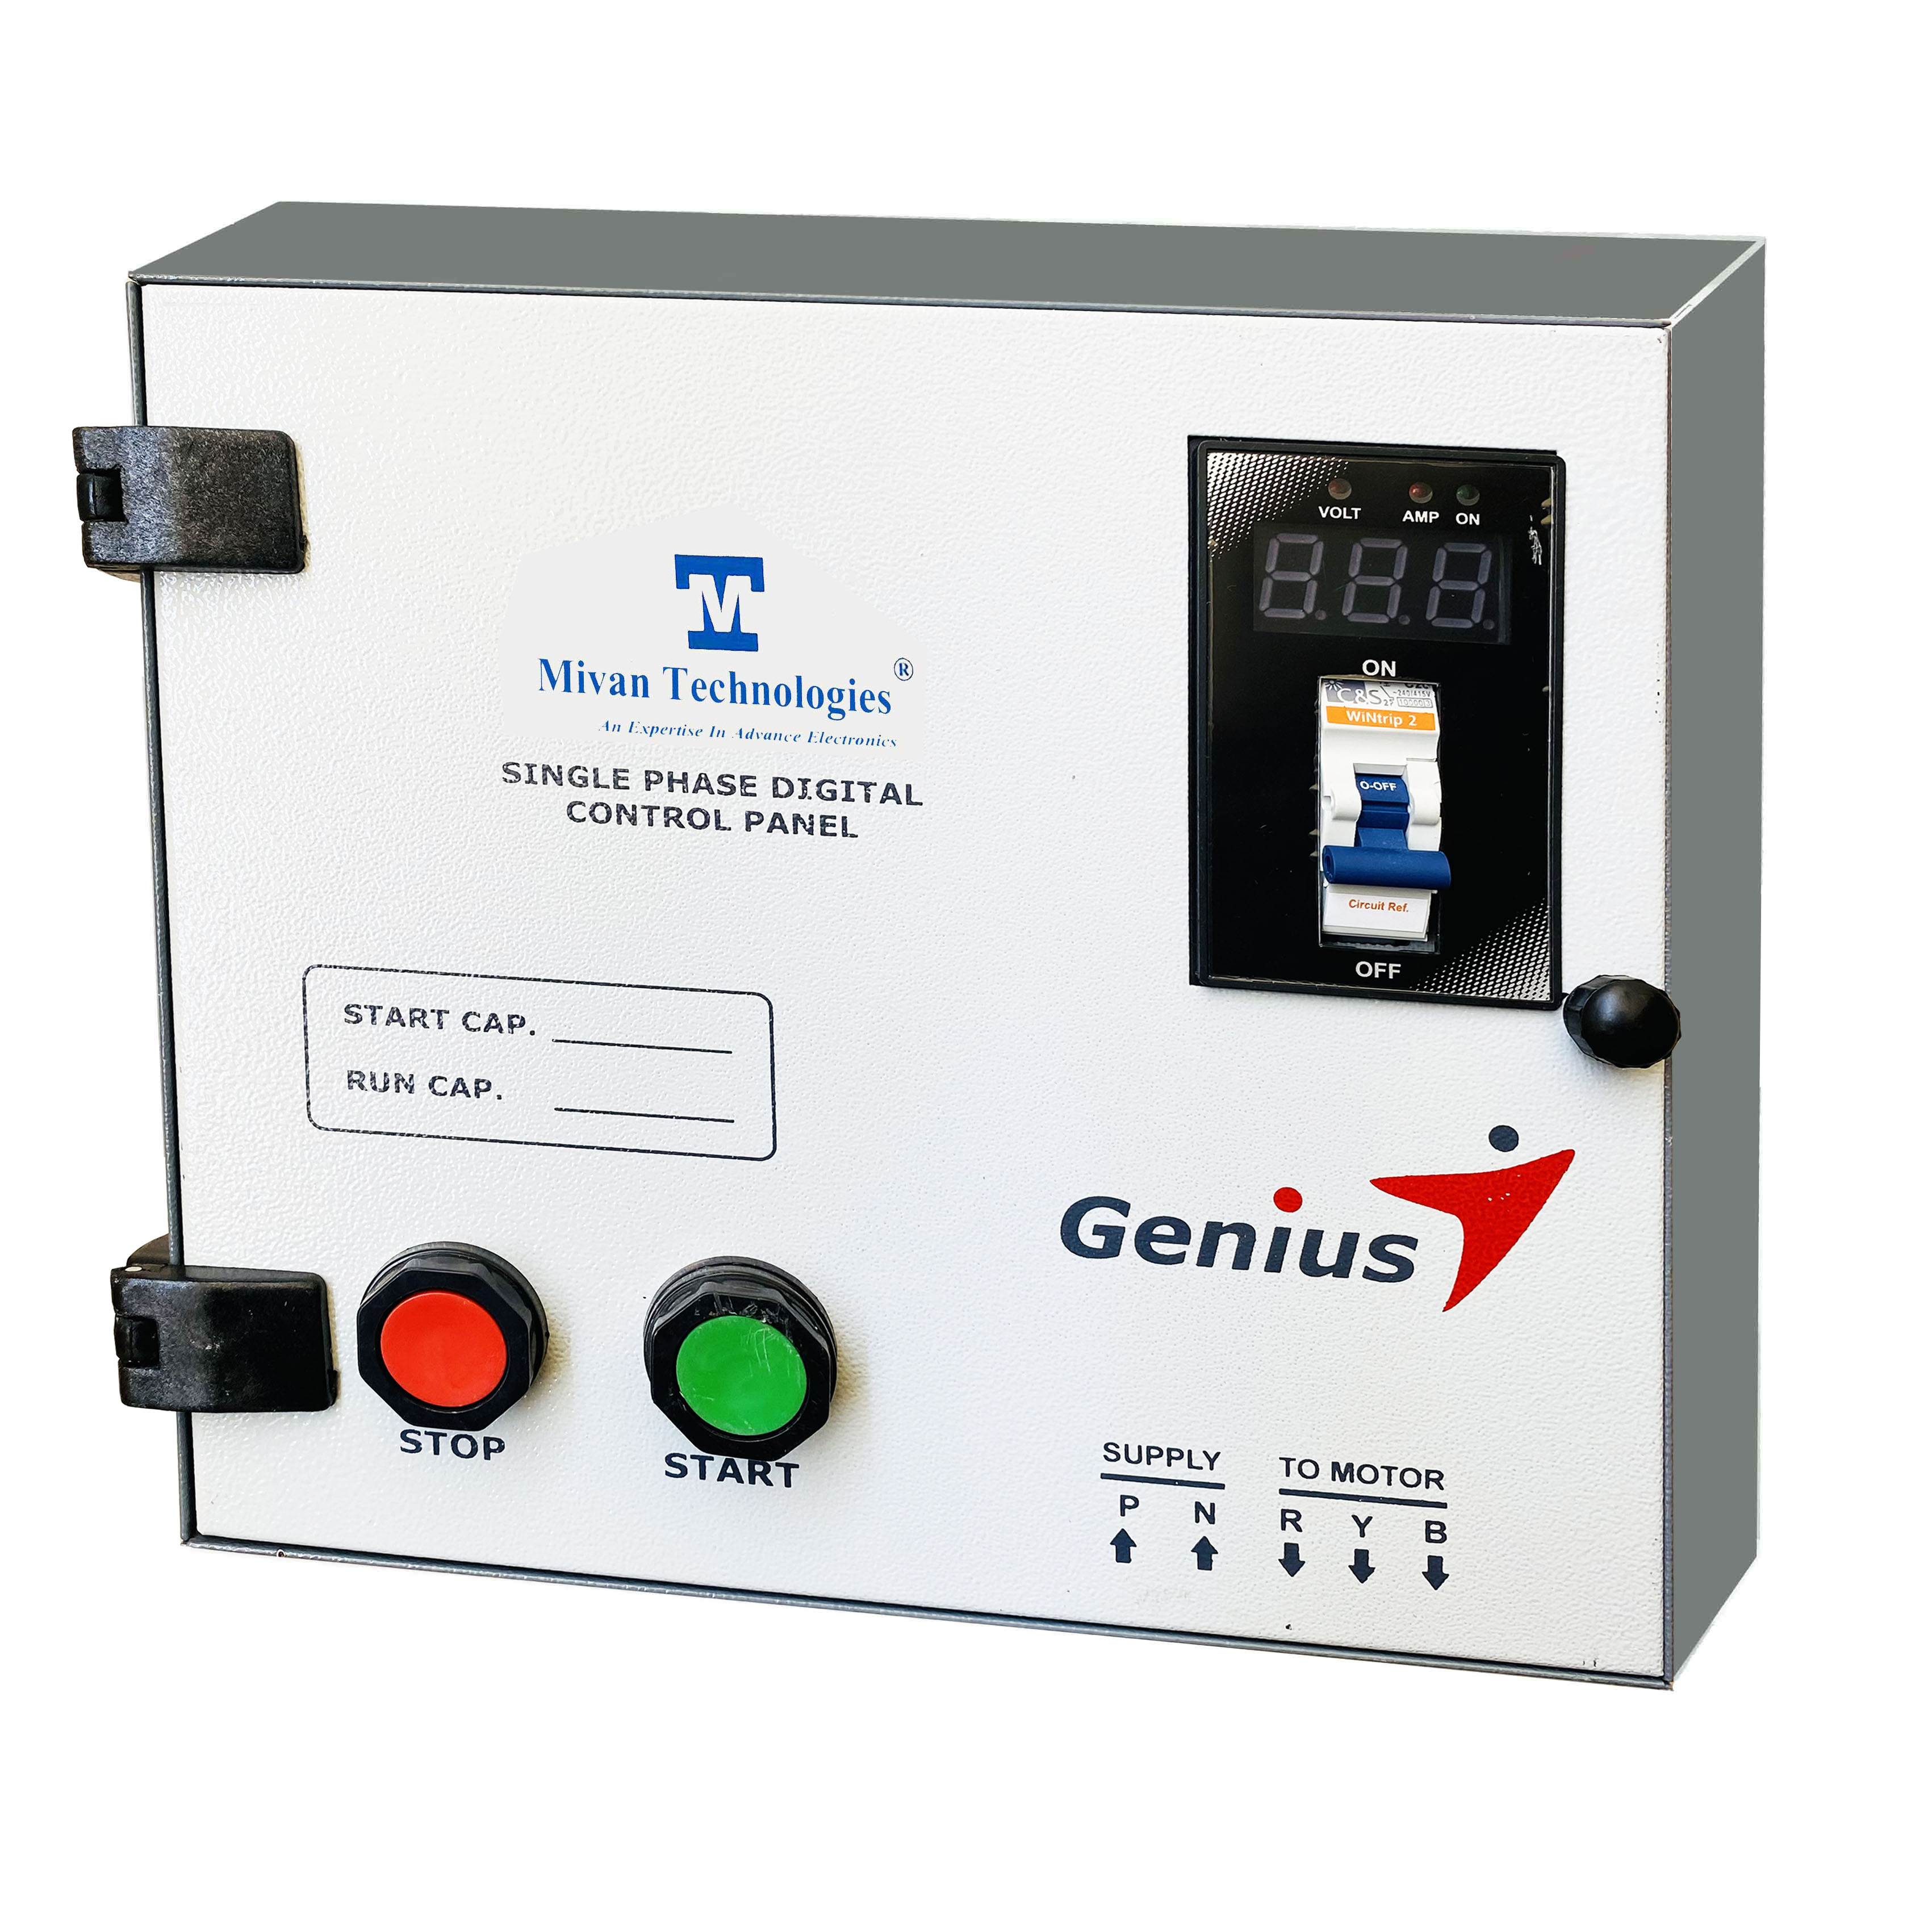 DMPS SR 1 HP Single phase Digital starter with BCH contactor with digital volt and amp meter and MCB start and run capacitor